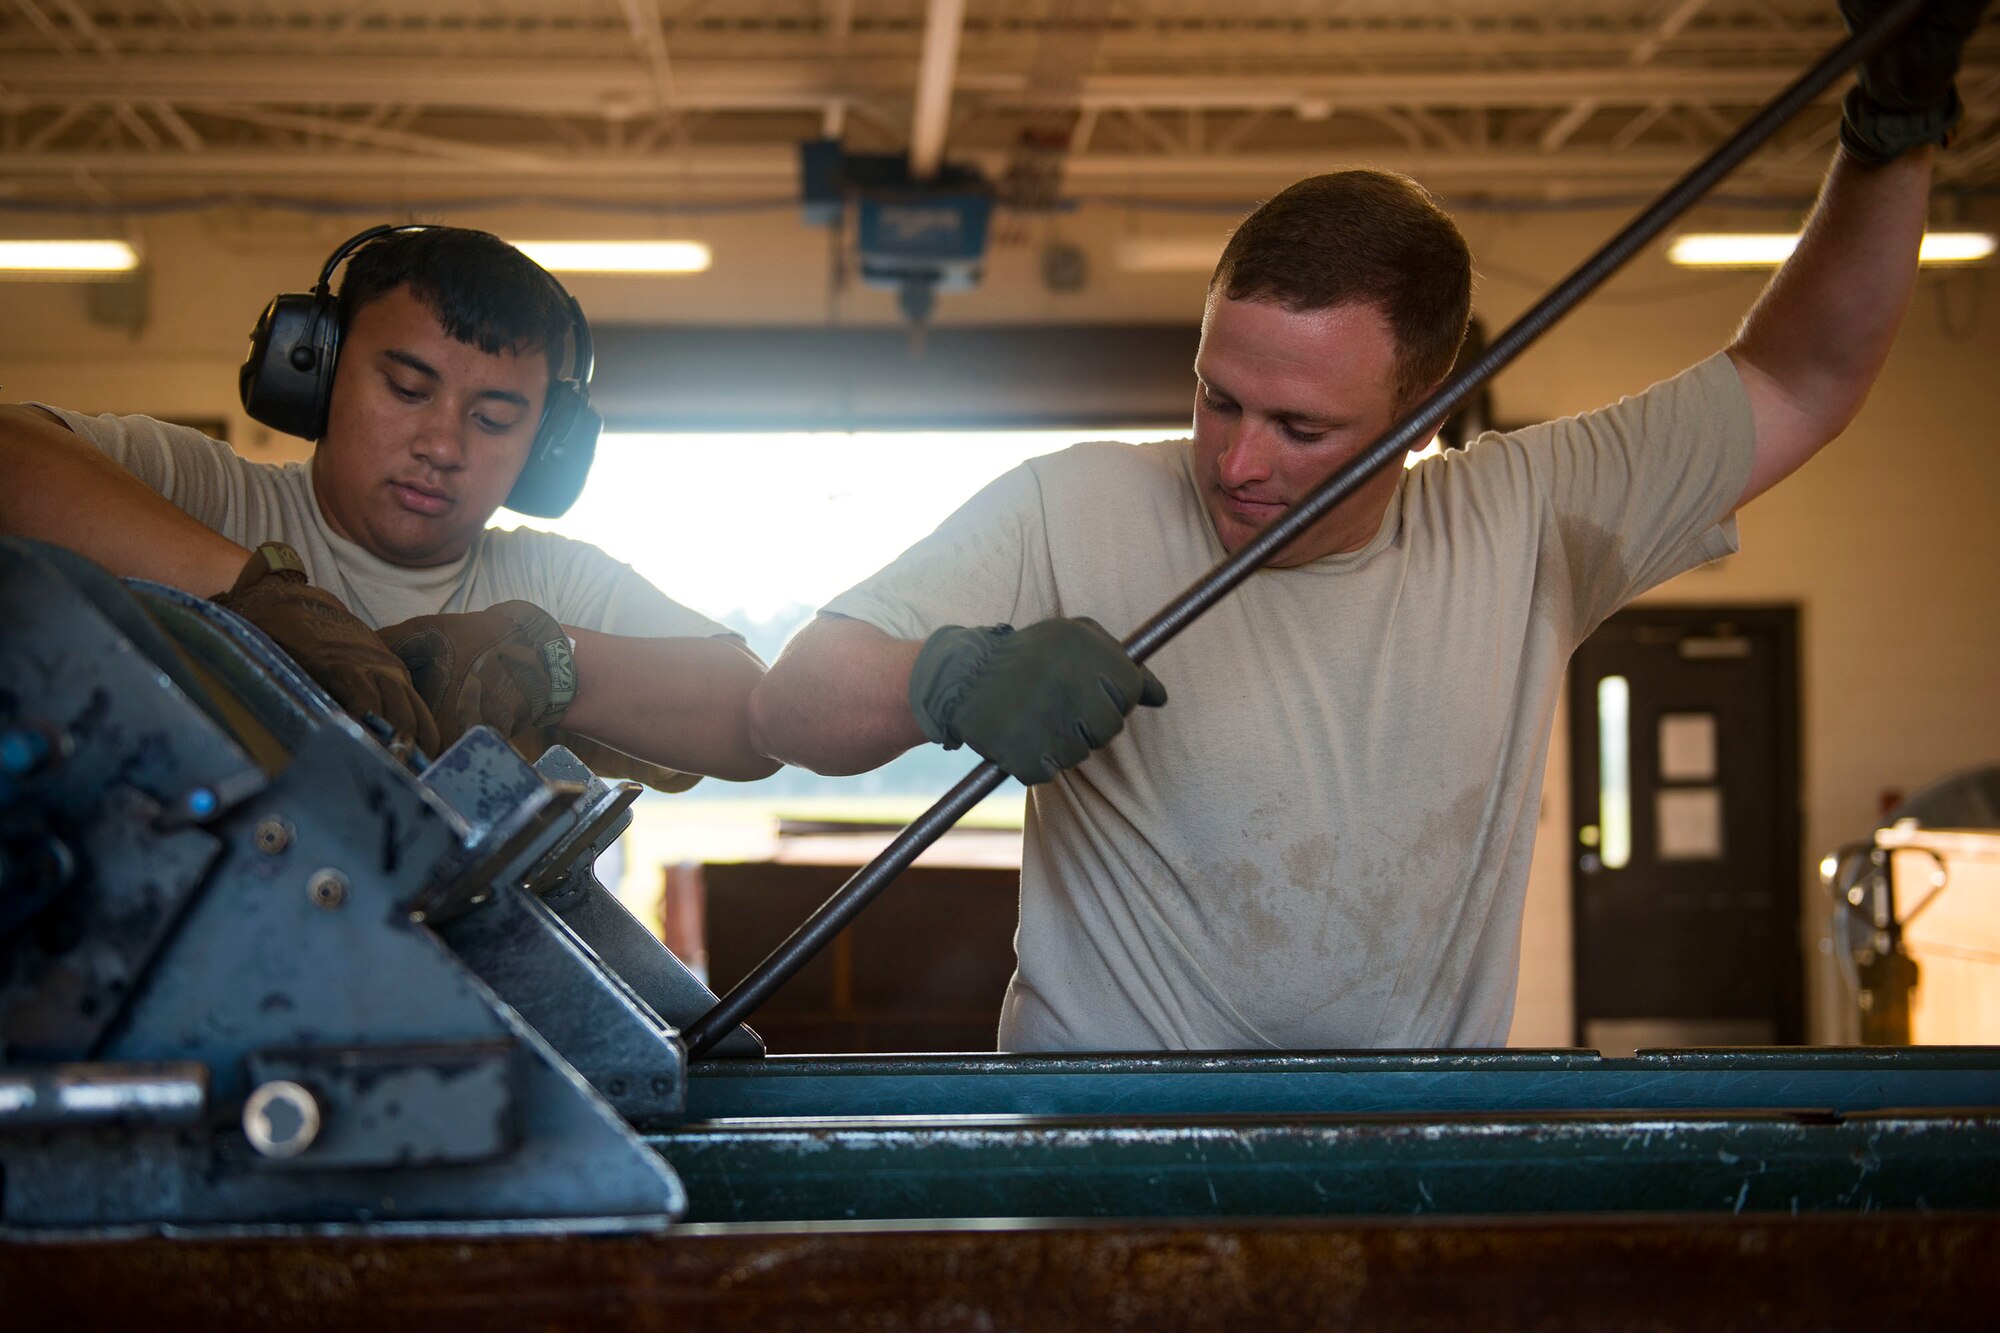 Tech. Sgt. Robert Lewis, right, 476th Maintenance Squadron (MXS) NCO in charge of line delivery, and Airman 1st Class Jordan Sili, 23d MXS crew member, work on feeding munitions through a GFU-7 rail system during a 30mm rounds processing, July 11, 2018, at Moody Air Force Base, Ga. This total force integration training with the 23d and 476th MXS allowed Airmen to work together to identify more ways to efficiently and safely conduct their mission. The munitions flight ensures the A-10C Thunderbolt IIs are armed with 30mm rounds to make sure they are able to continue their mission while at home station deployed. (U.S. Air Force photo by Airman 1st Class Erick Requadt)